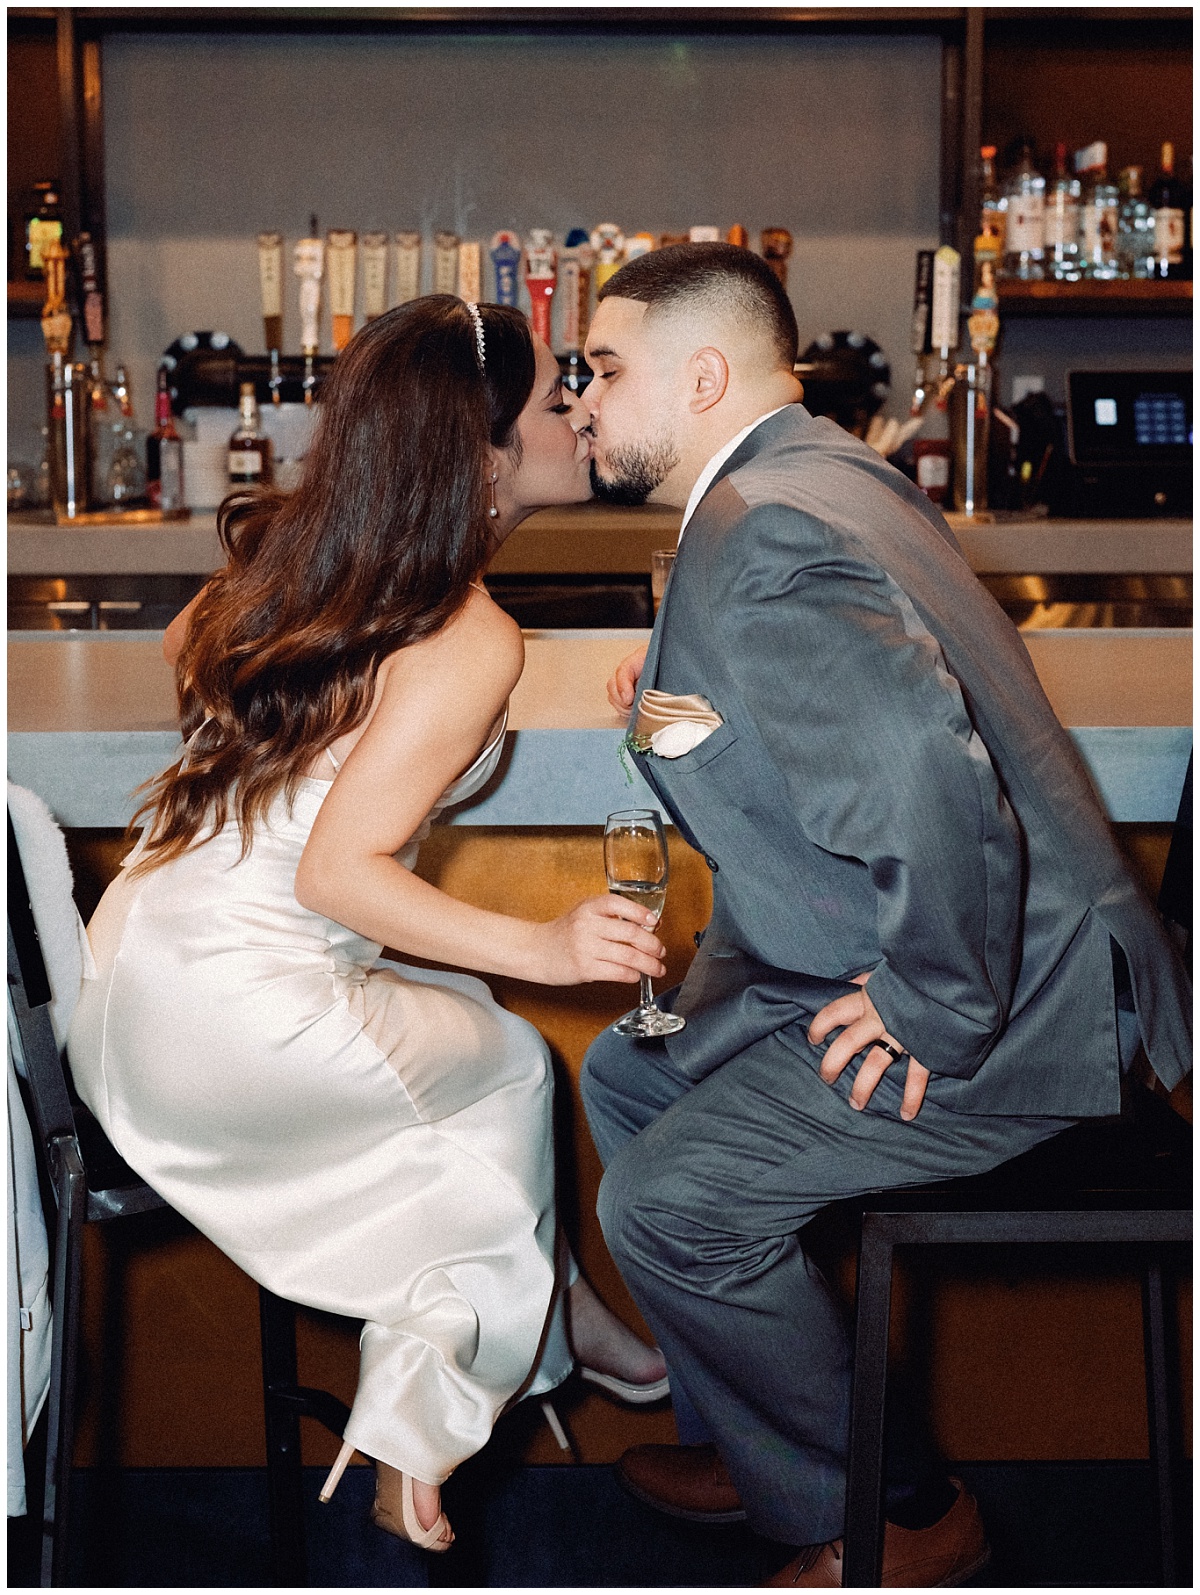 Wedding Photos that are Documentary with a fun twist